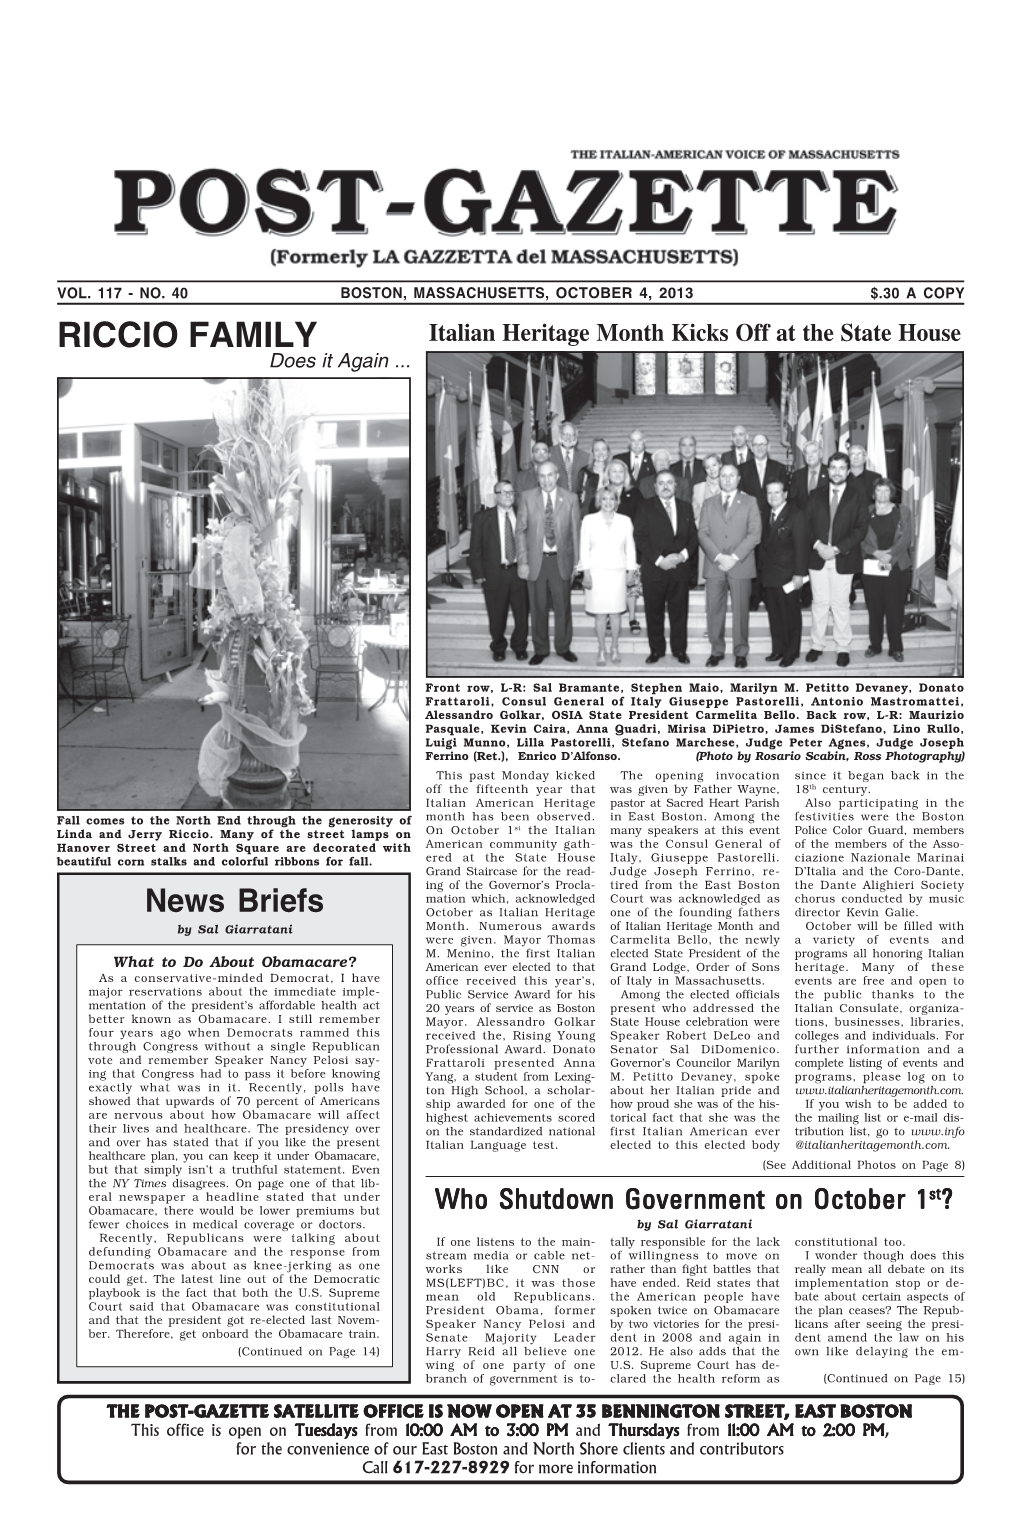 RICCIO FAMILY Italian Heritage Month Kicks Off at the State House Does It Again